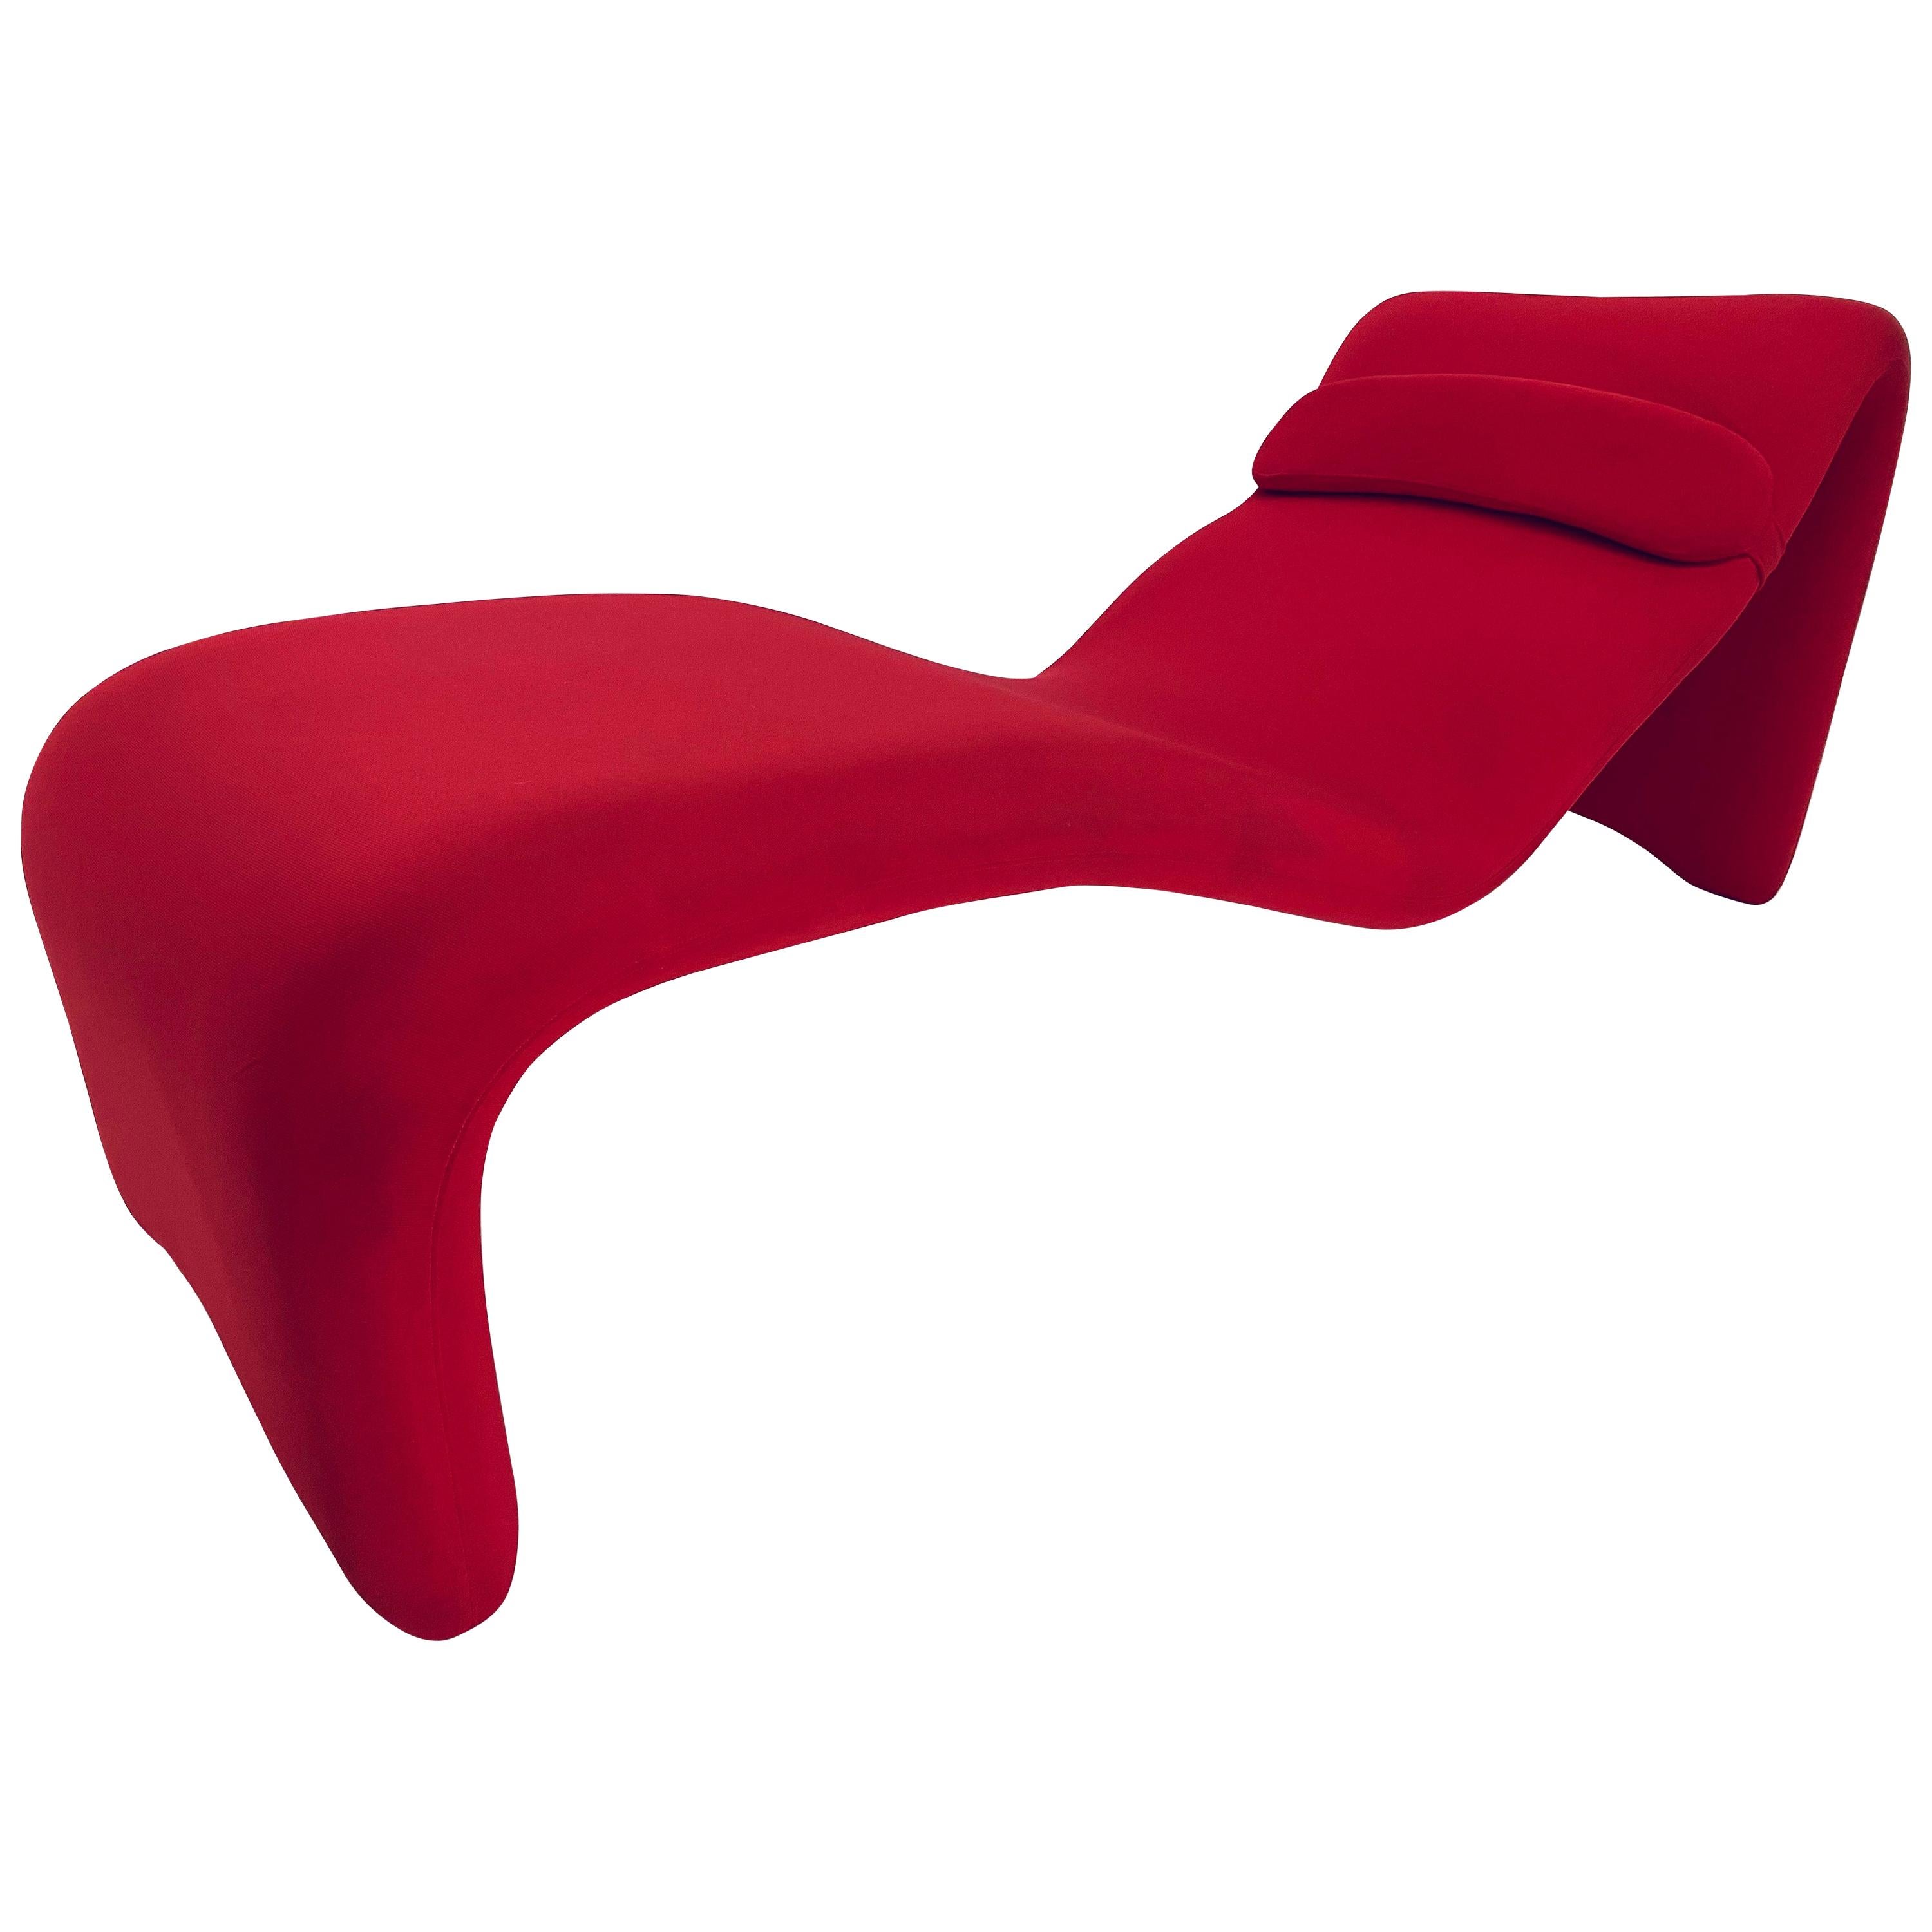 Olivier Mourgue Djinn Style Relaxer Wave Chaise Lounge for Quebec 69